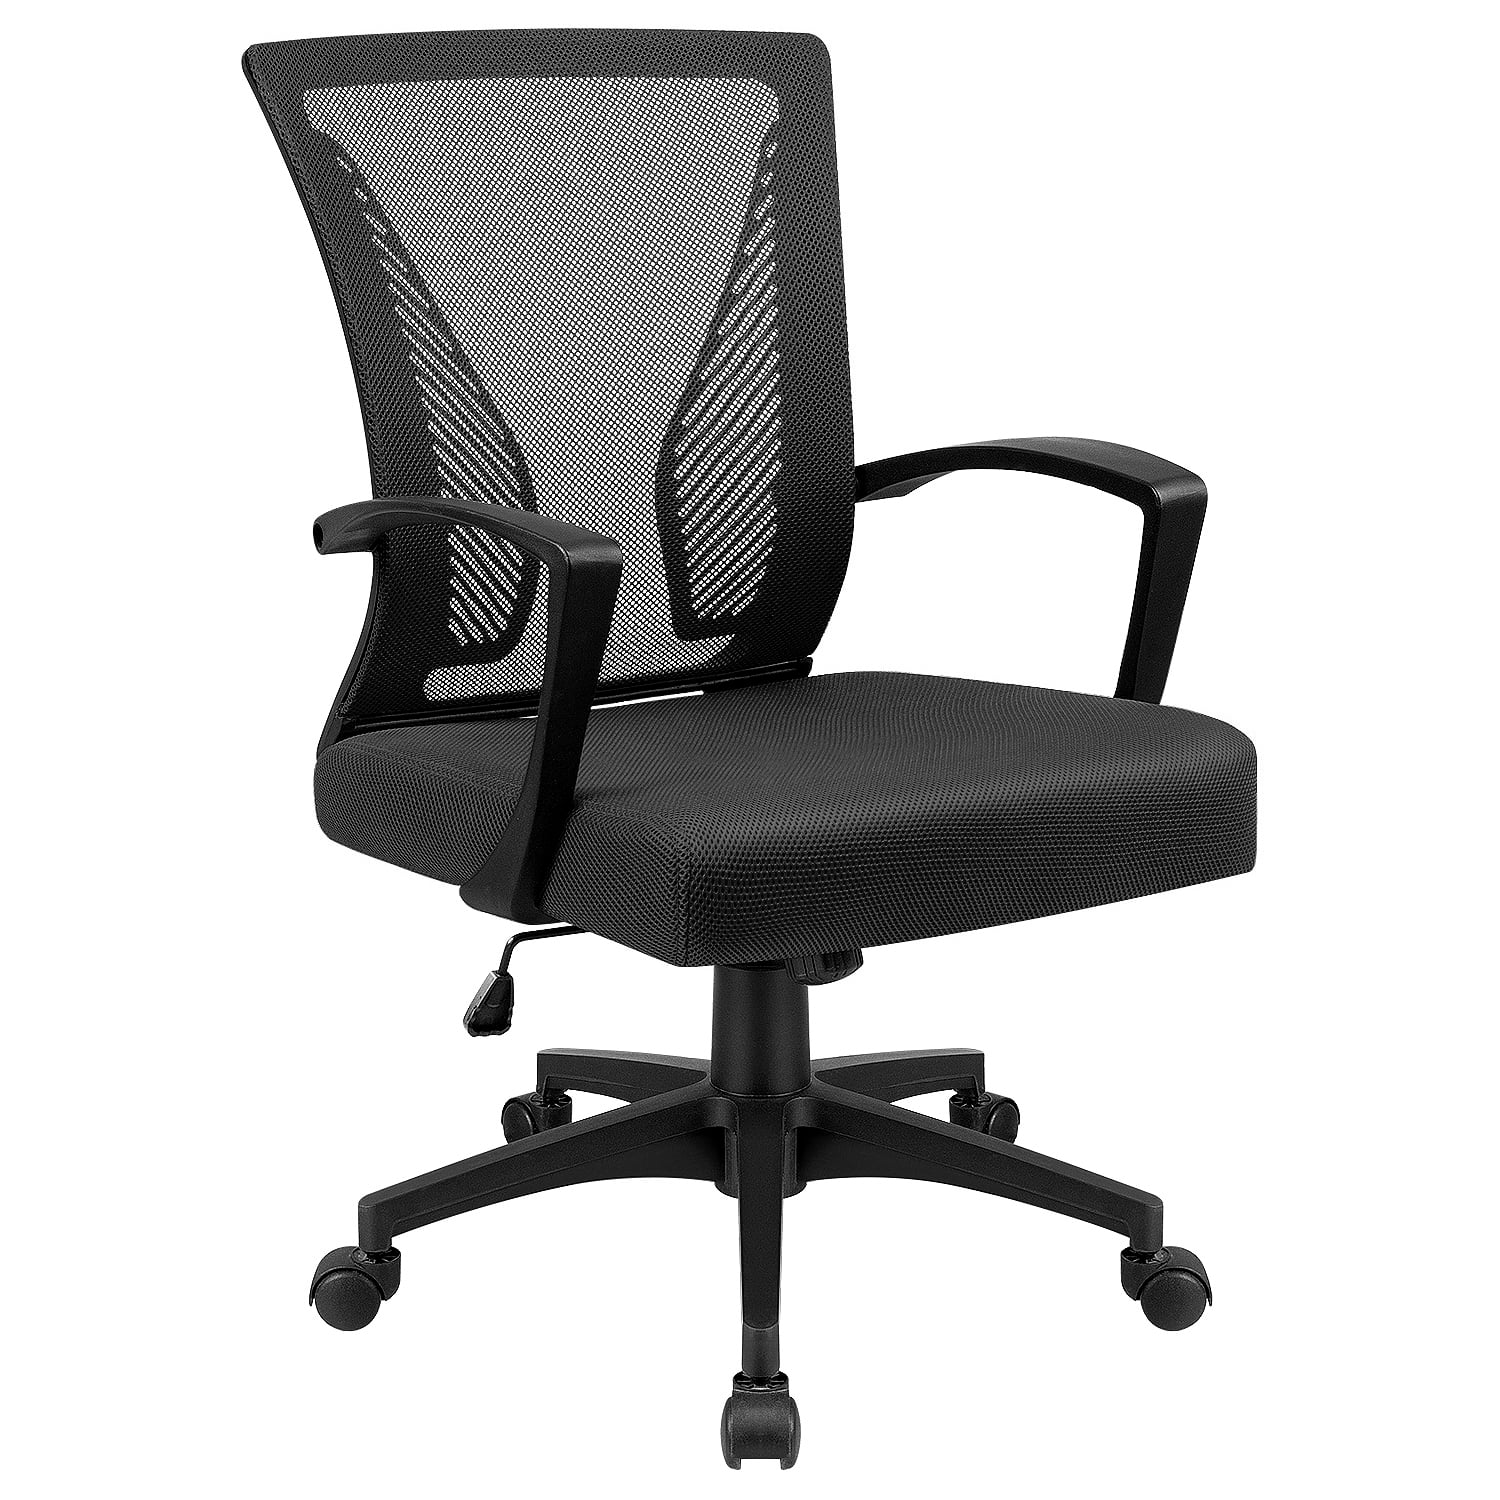 Lacoo Mid-Back Office Desk Chair Ergonomic Mesh Task Chair with